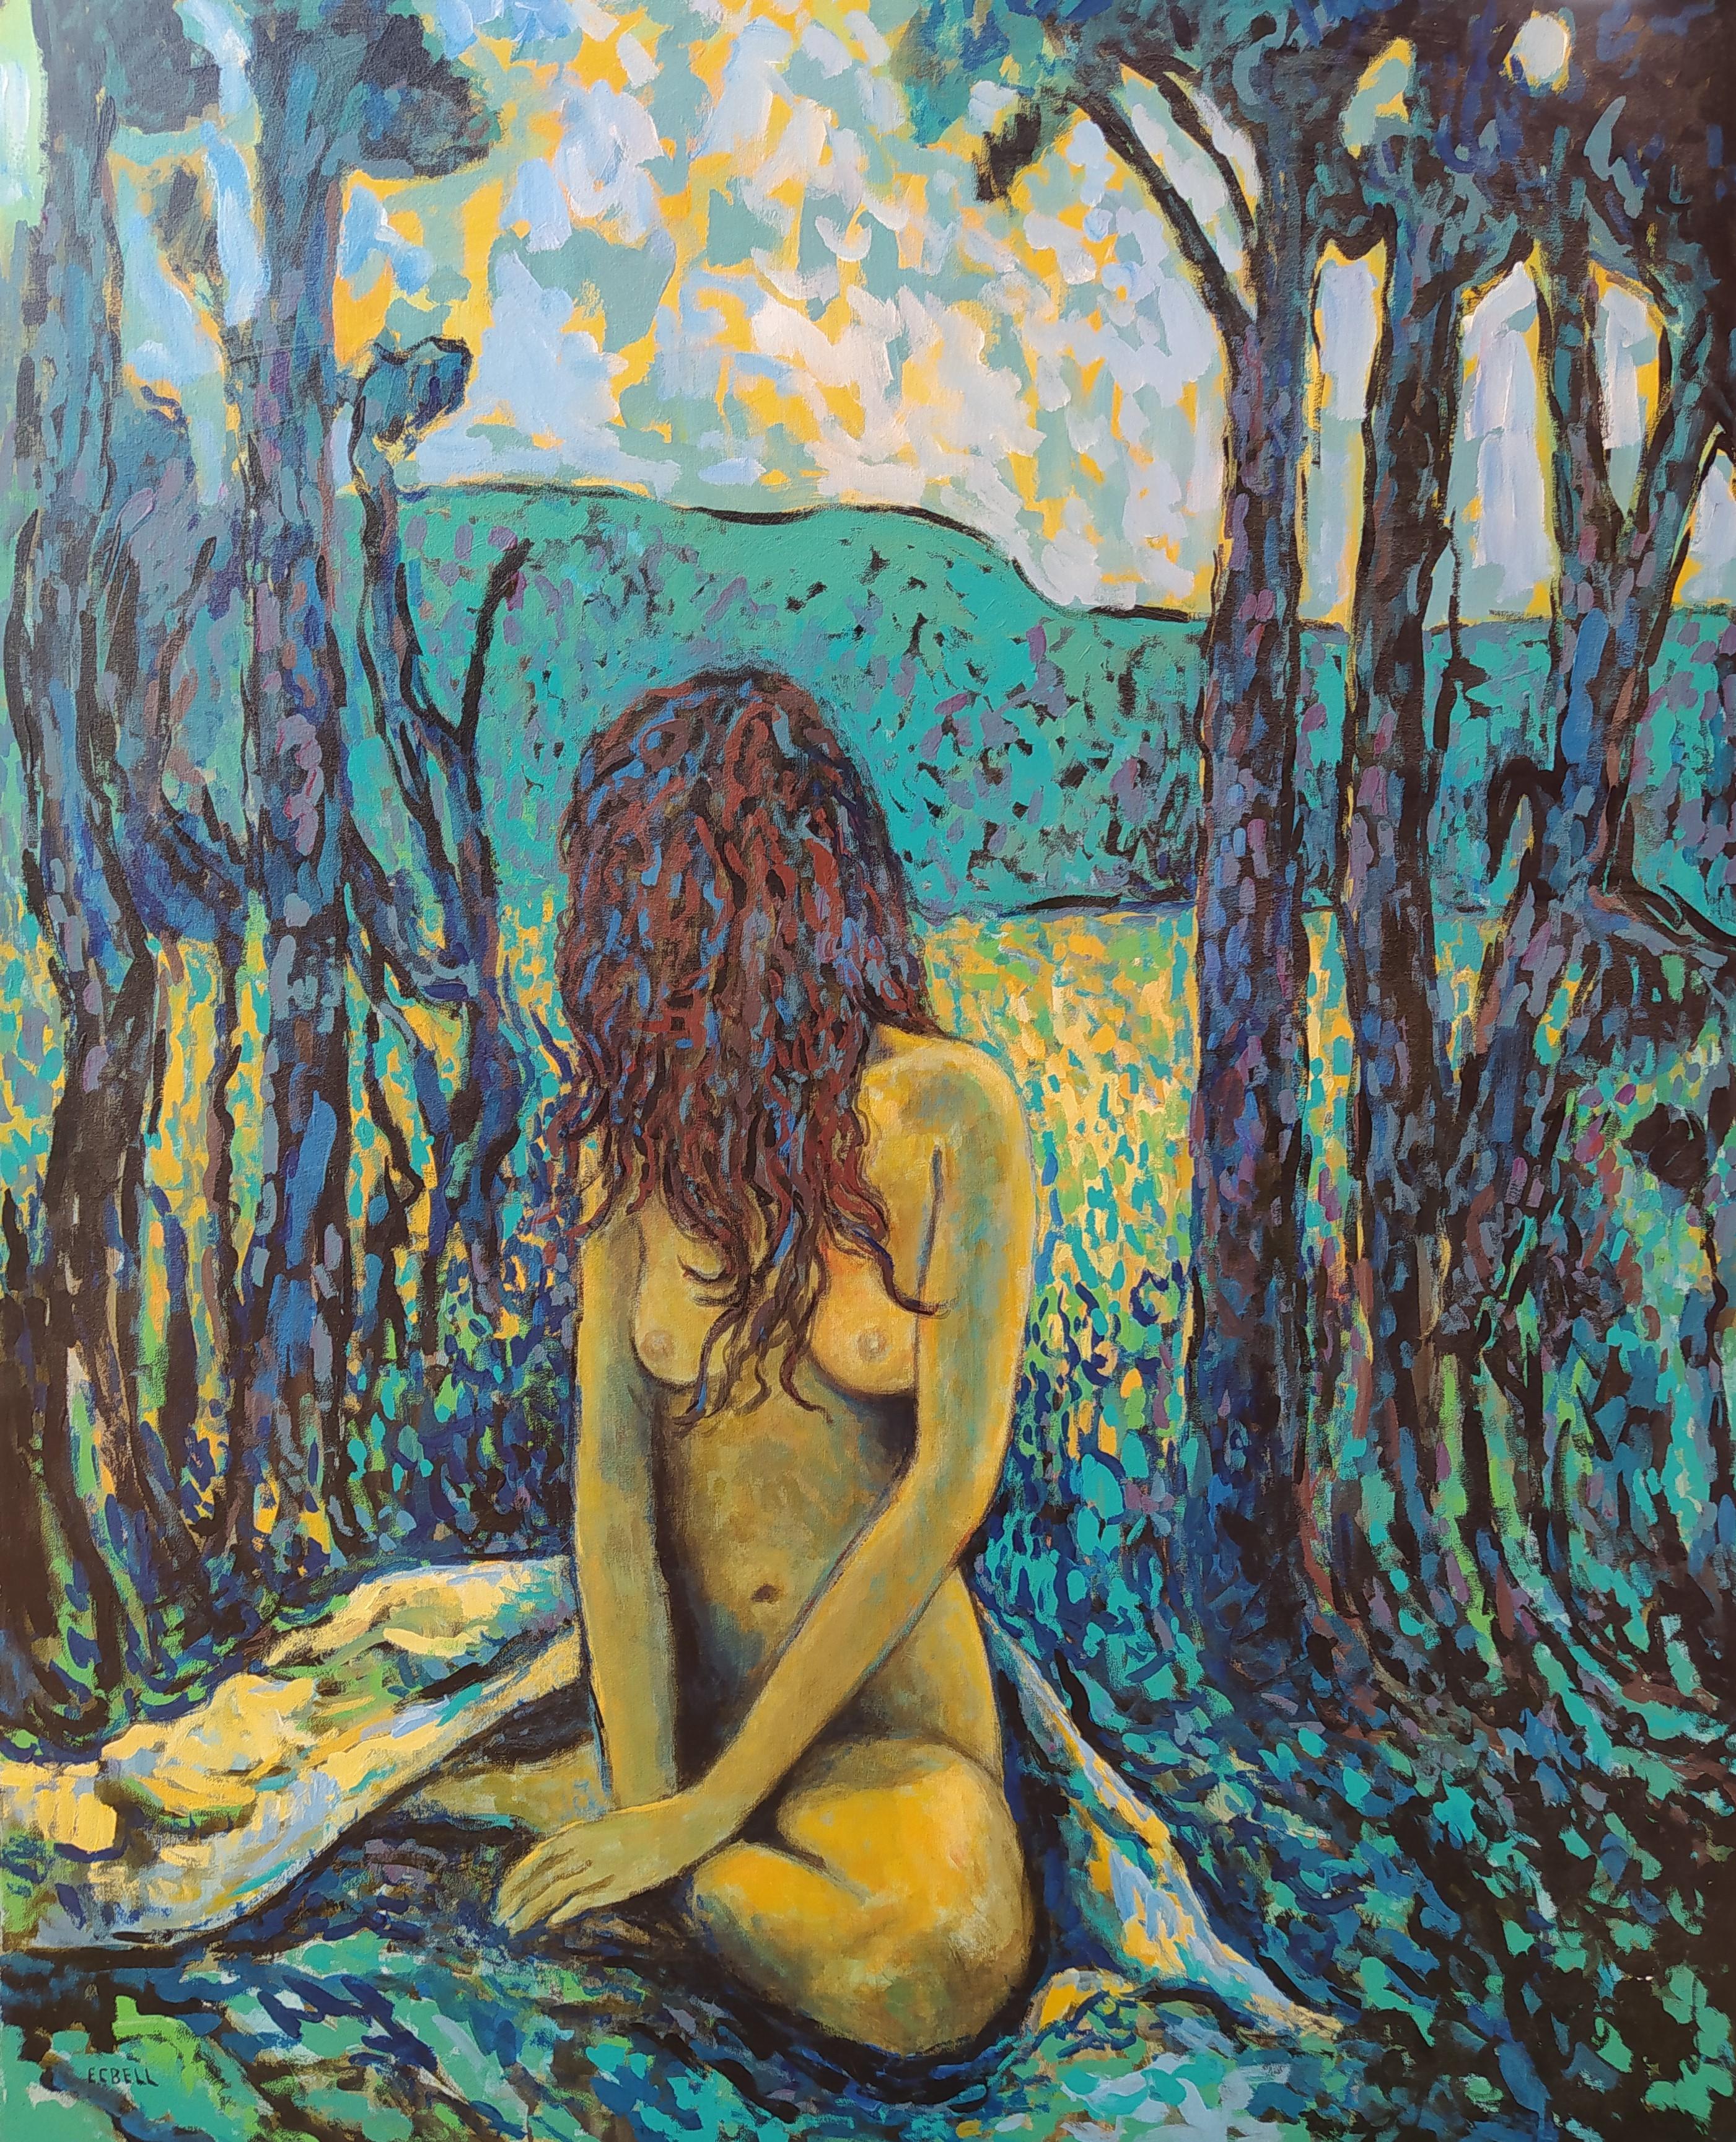 E.C. Bell Nude Painting - "Rhonda" - Vertical expressionist turquoise landscape with female nude.